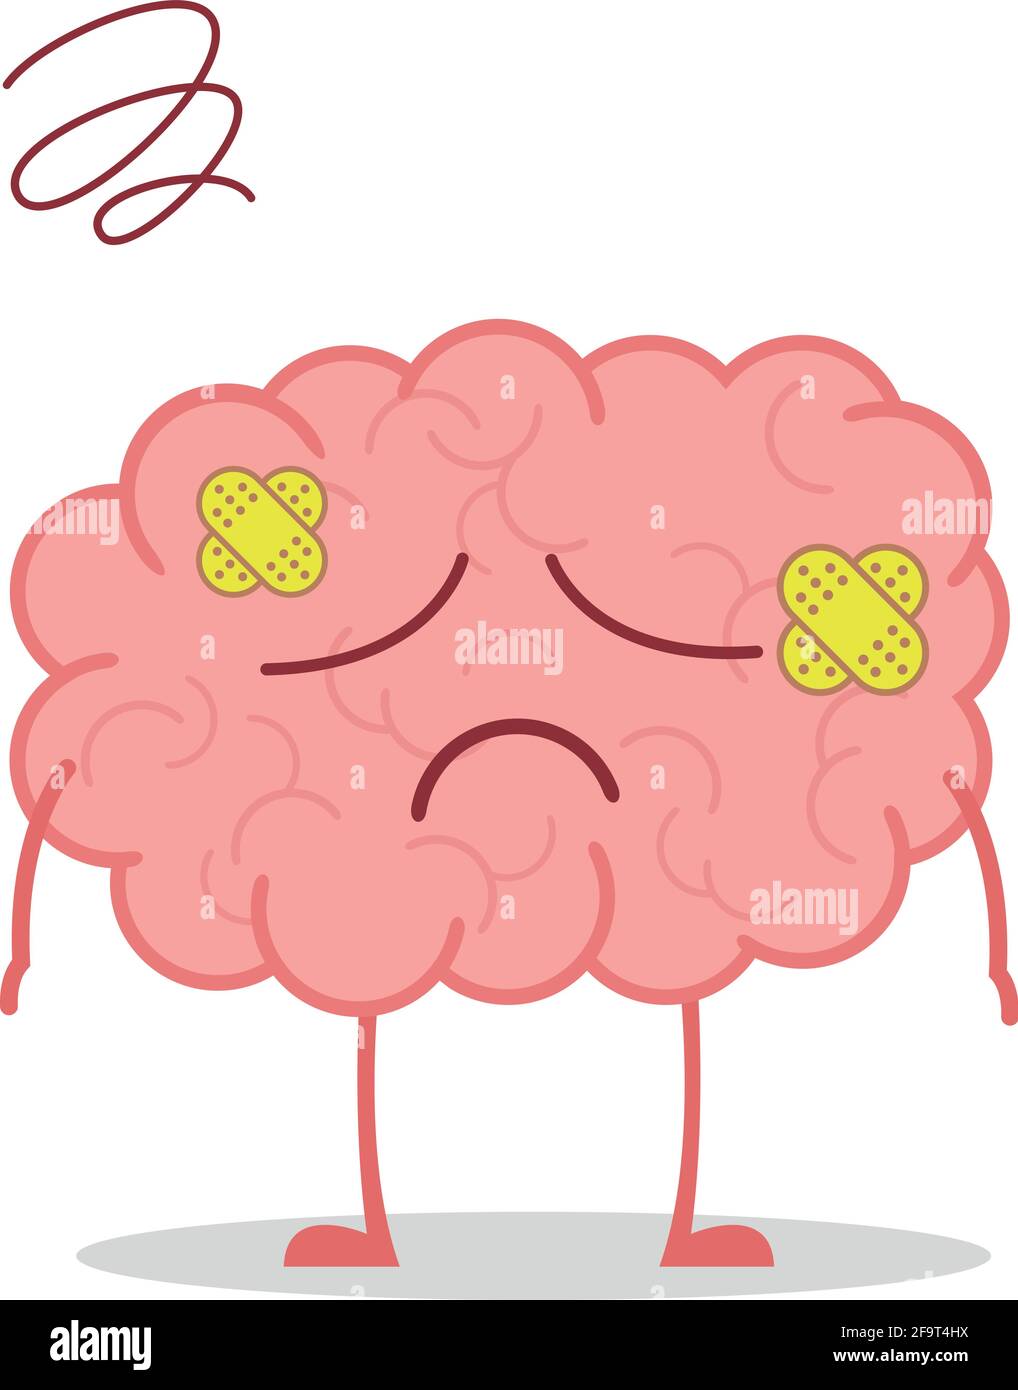 Vector illustration of a sick and sad brain in cartoon style. Stock Vector